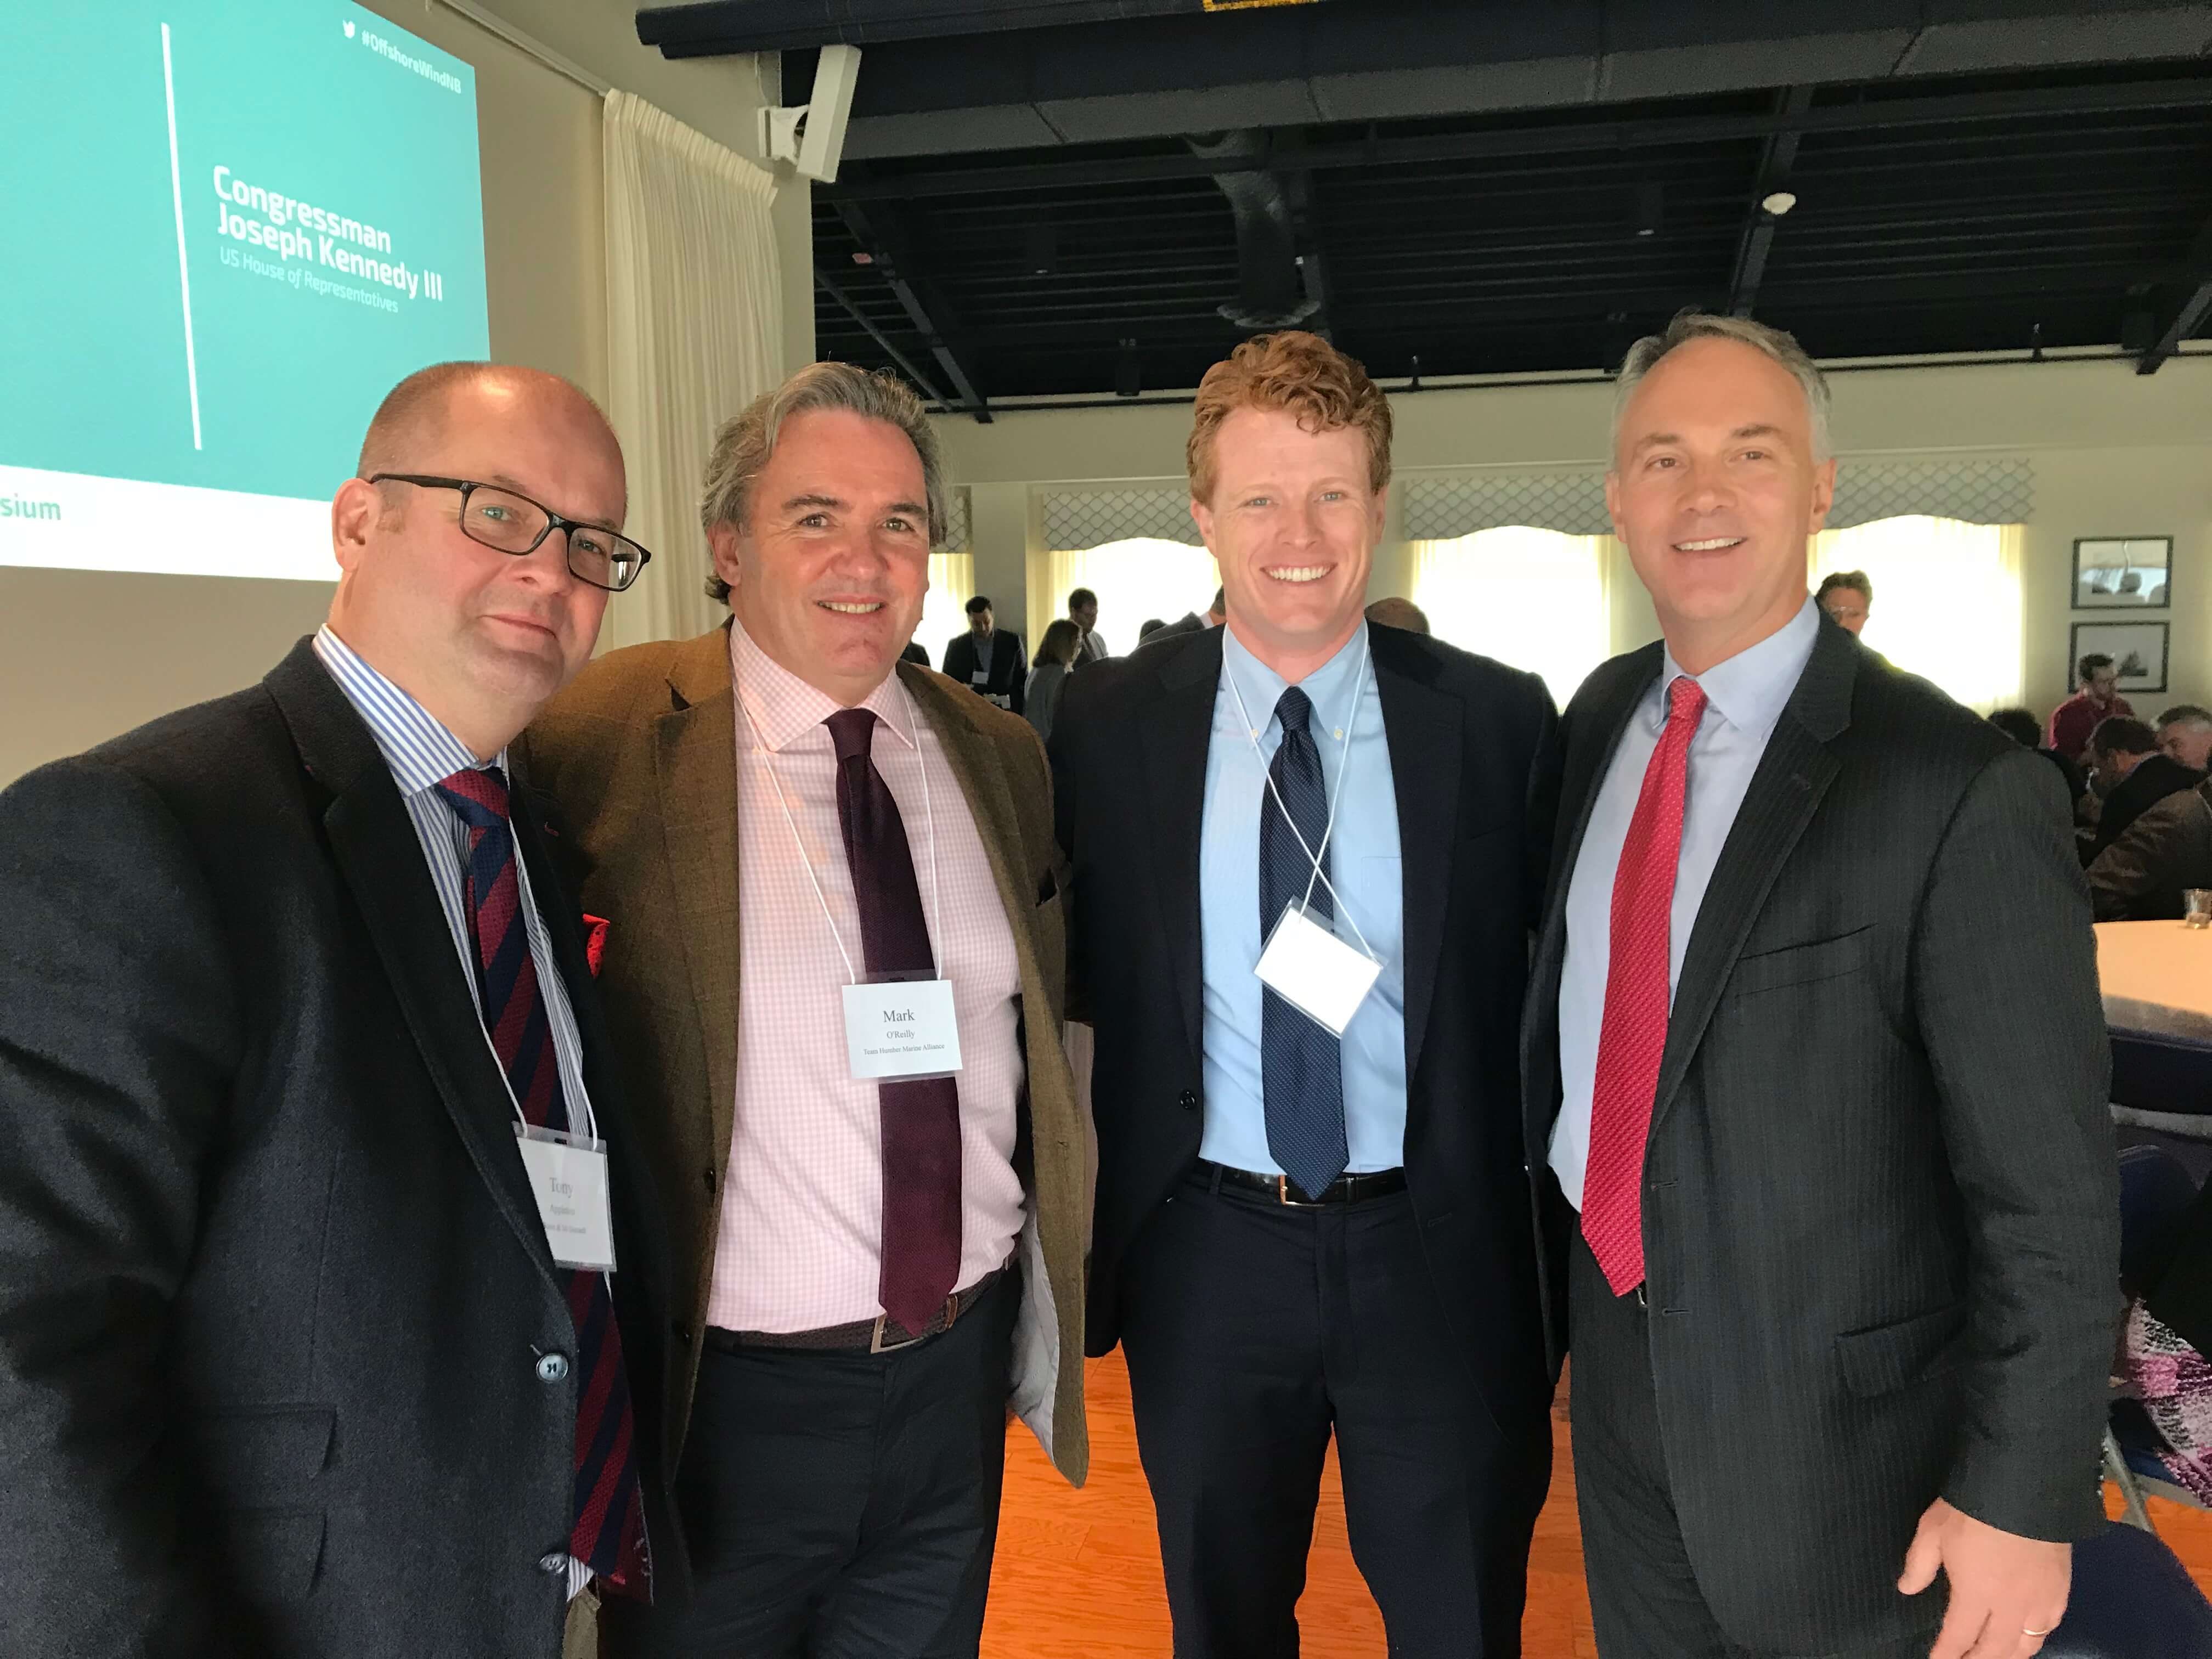 Picture caption from left to right: Pictured at the New Bedford Offshore Wind Symposium are Tony Appleton, Burns & McDonnell; Mark O’Reilly, Team Humber Marine Alliance; Joseph Kennedy III and Jon Mitchell Mayor of New Bedford.